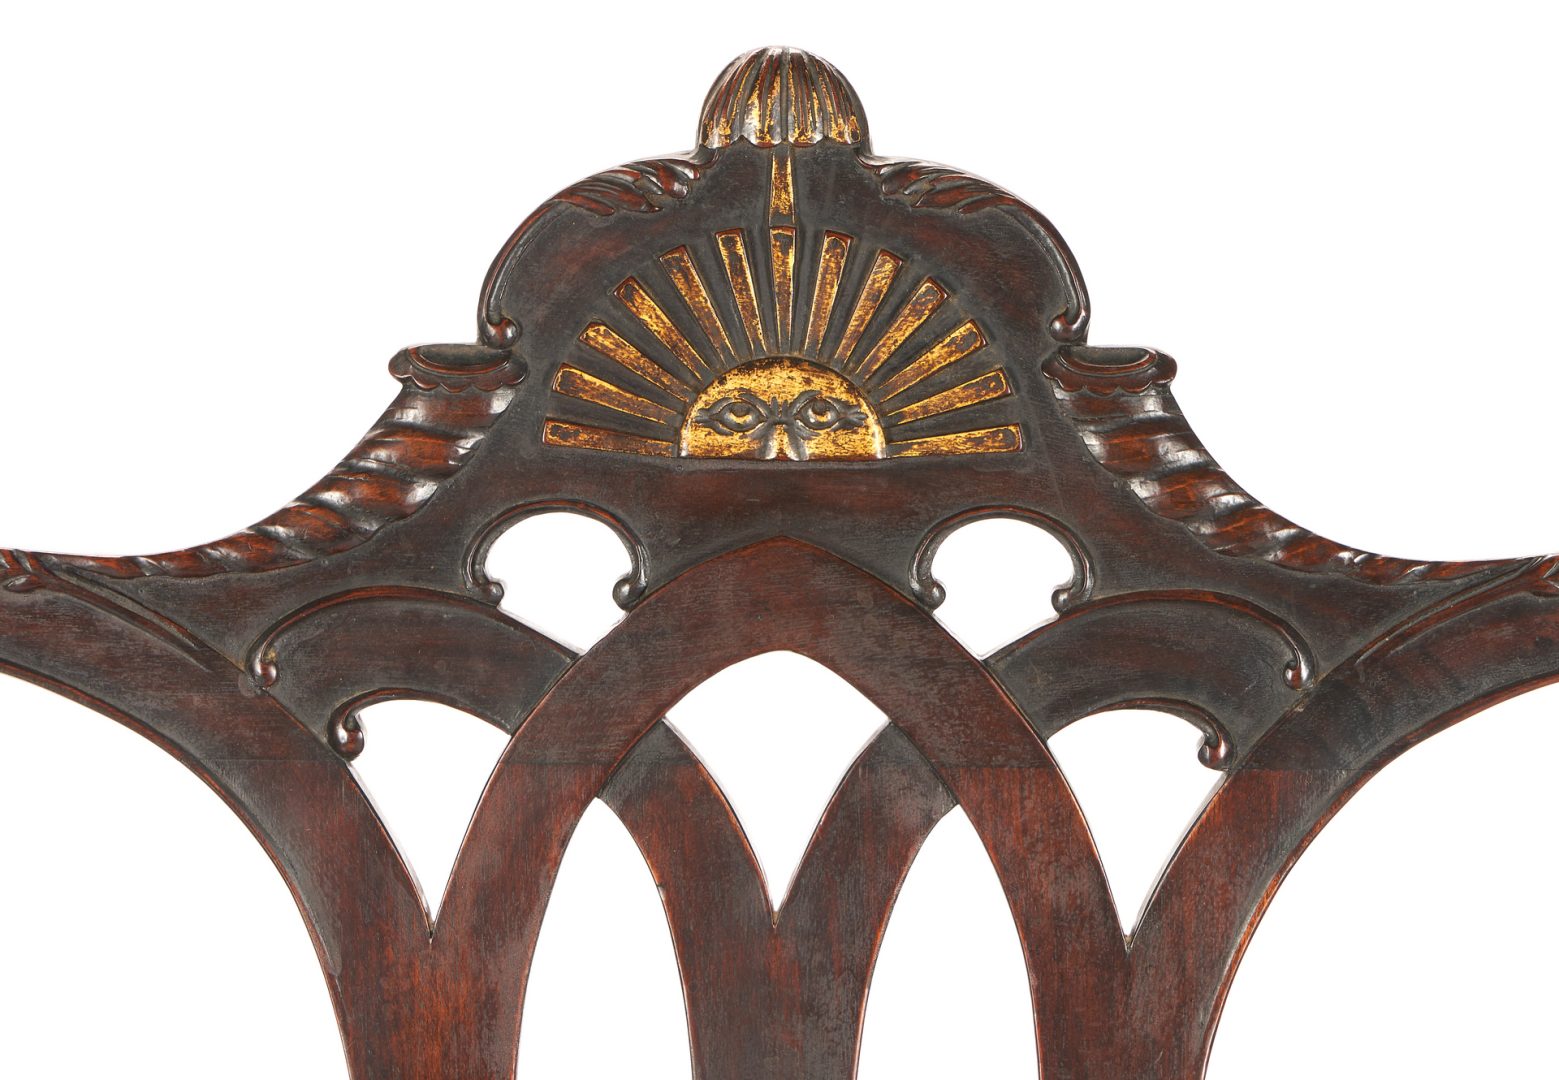 Lot 269: Chippendale style "Rising Sun" Chair